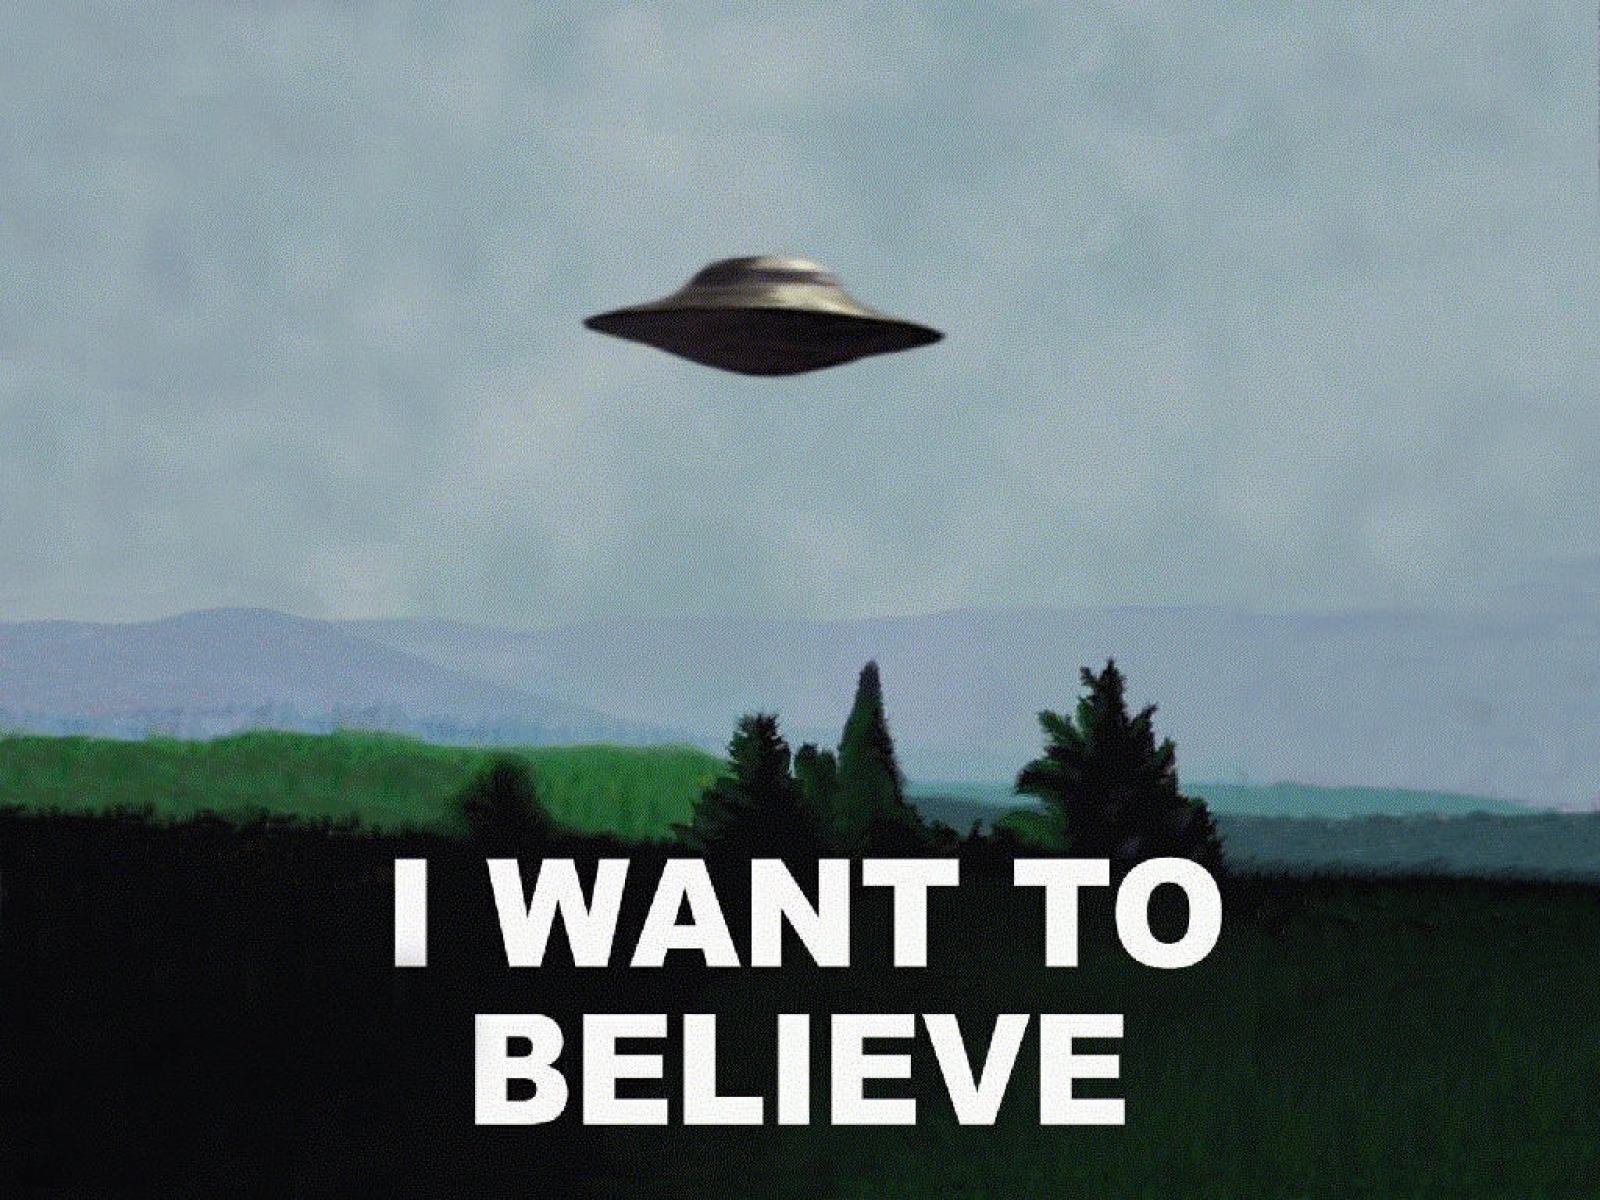 I want see you tonight. I want to believe. Плакат с НЛО I want to believe. Постер i want to believe. Летающая тарелка i want to believe.